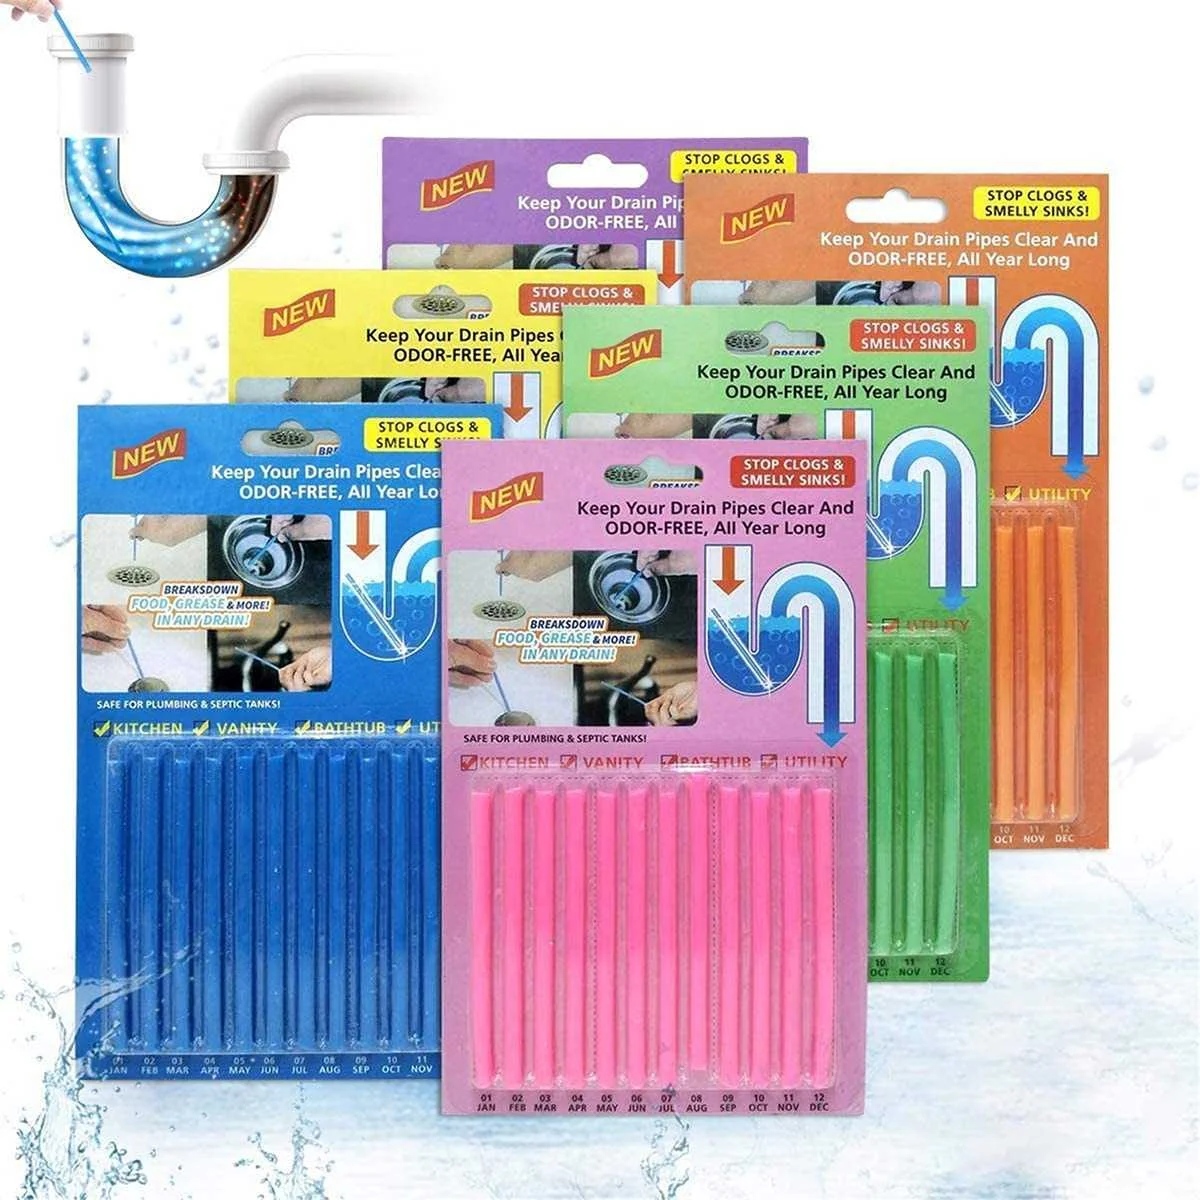 72pcs/set Drain Cleaner Sticks Pipes Sewer Cleaning Unblocker Deodorizer Odor Remover Rod for Toilet Kitchen Decontamination